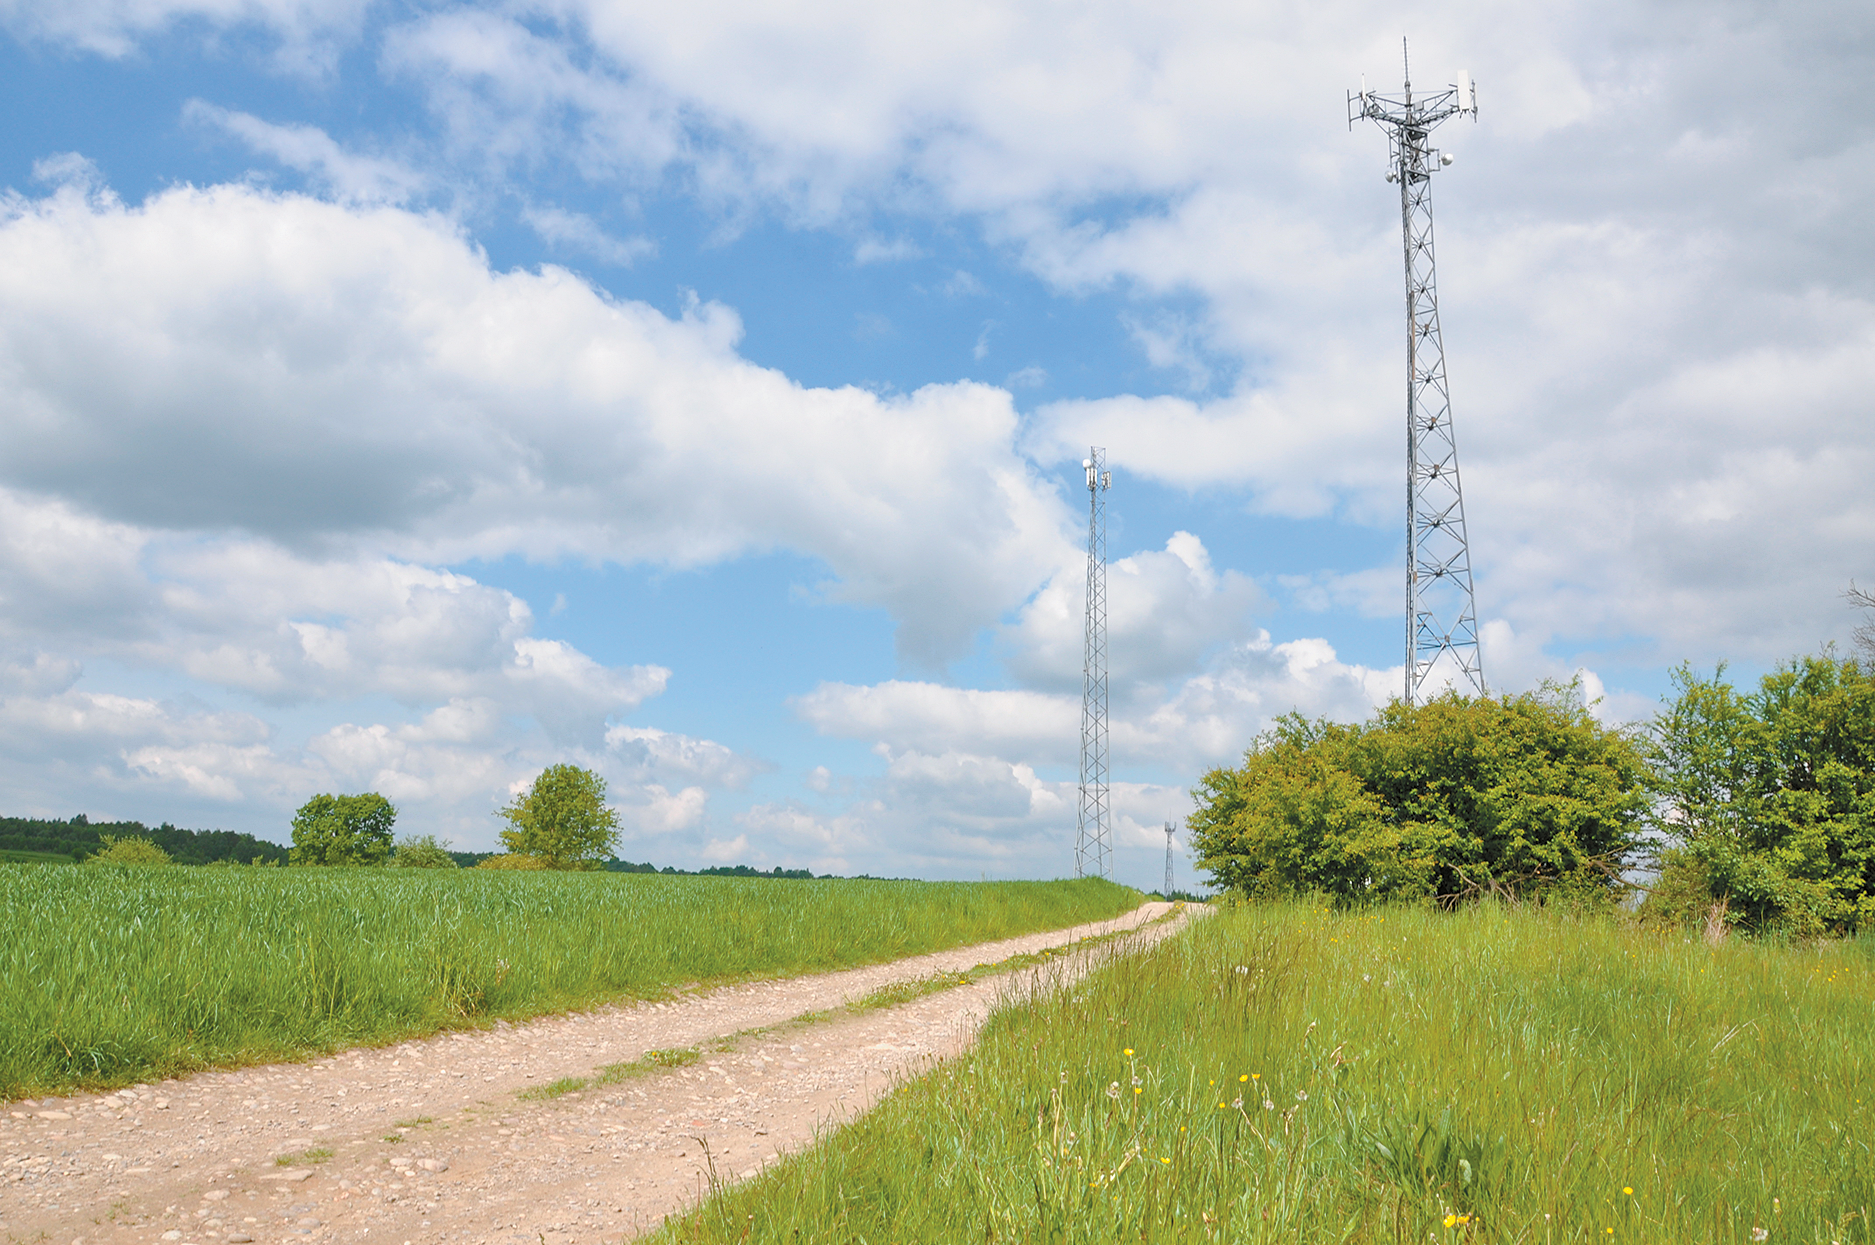 Commentary: High-speed internet is vital for farms, rural regions